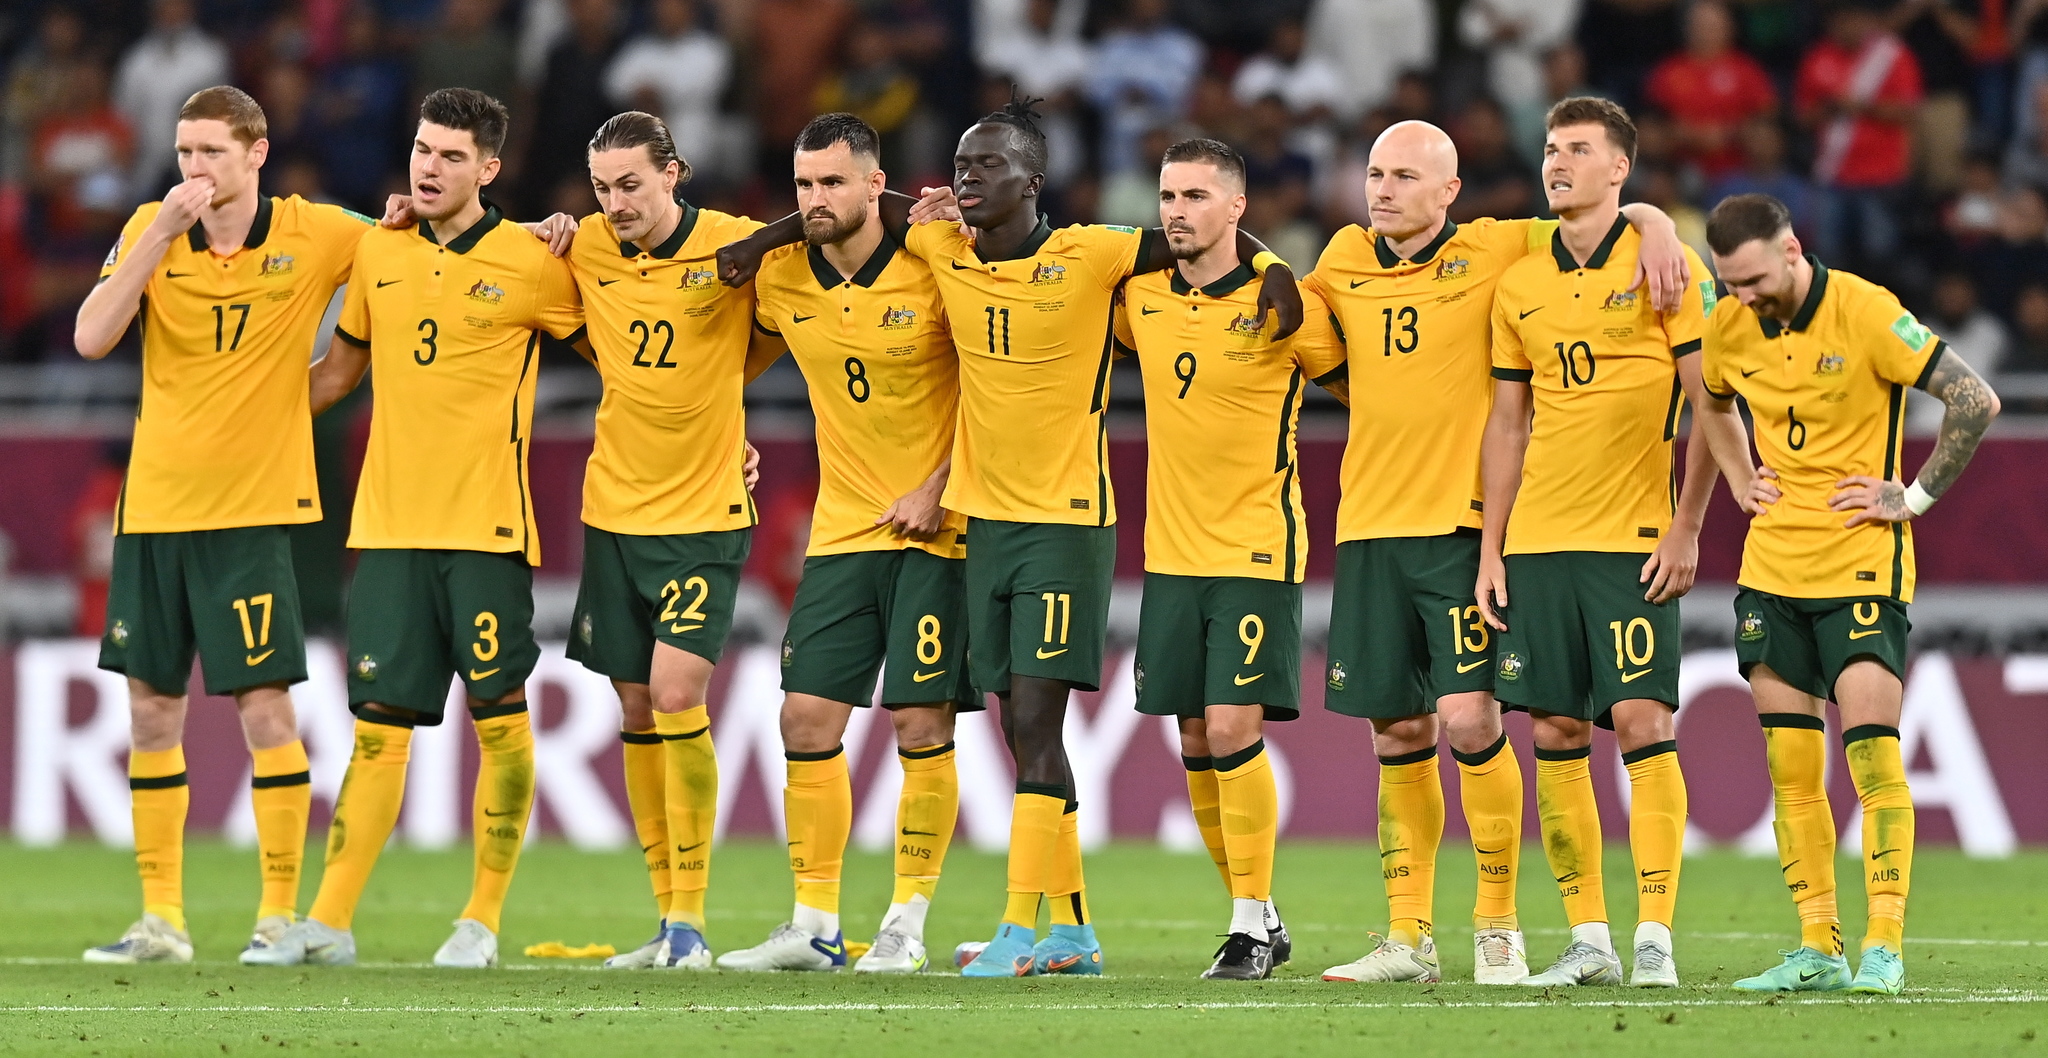 Australia Qualifies For FIFA World Cup Round Of 16 for First Time Since 2006